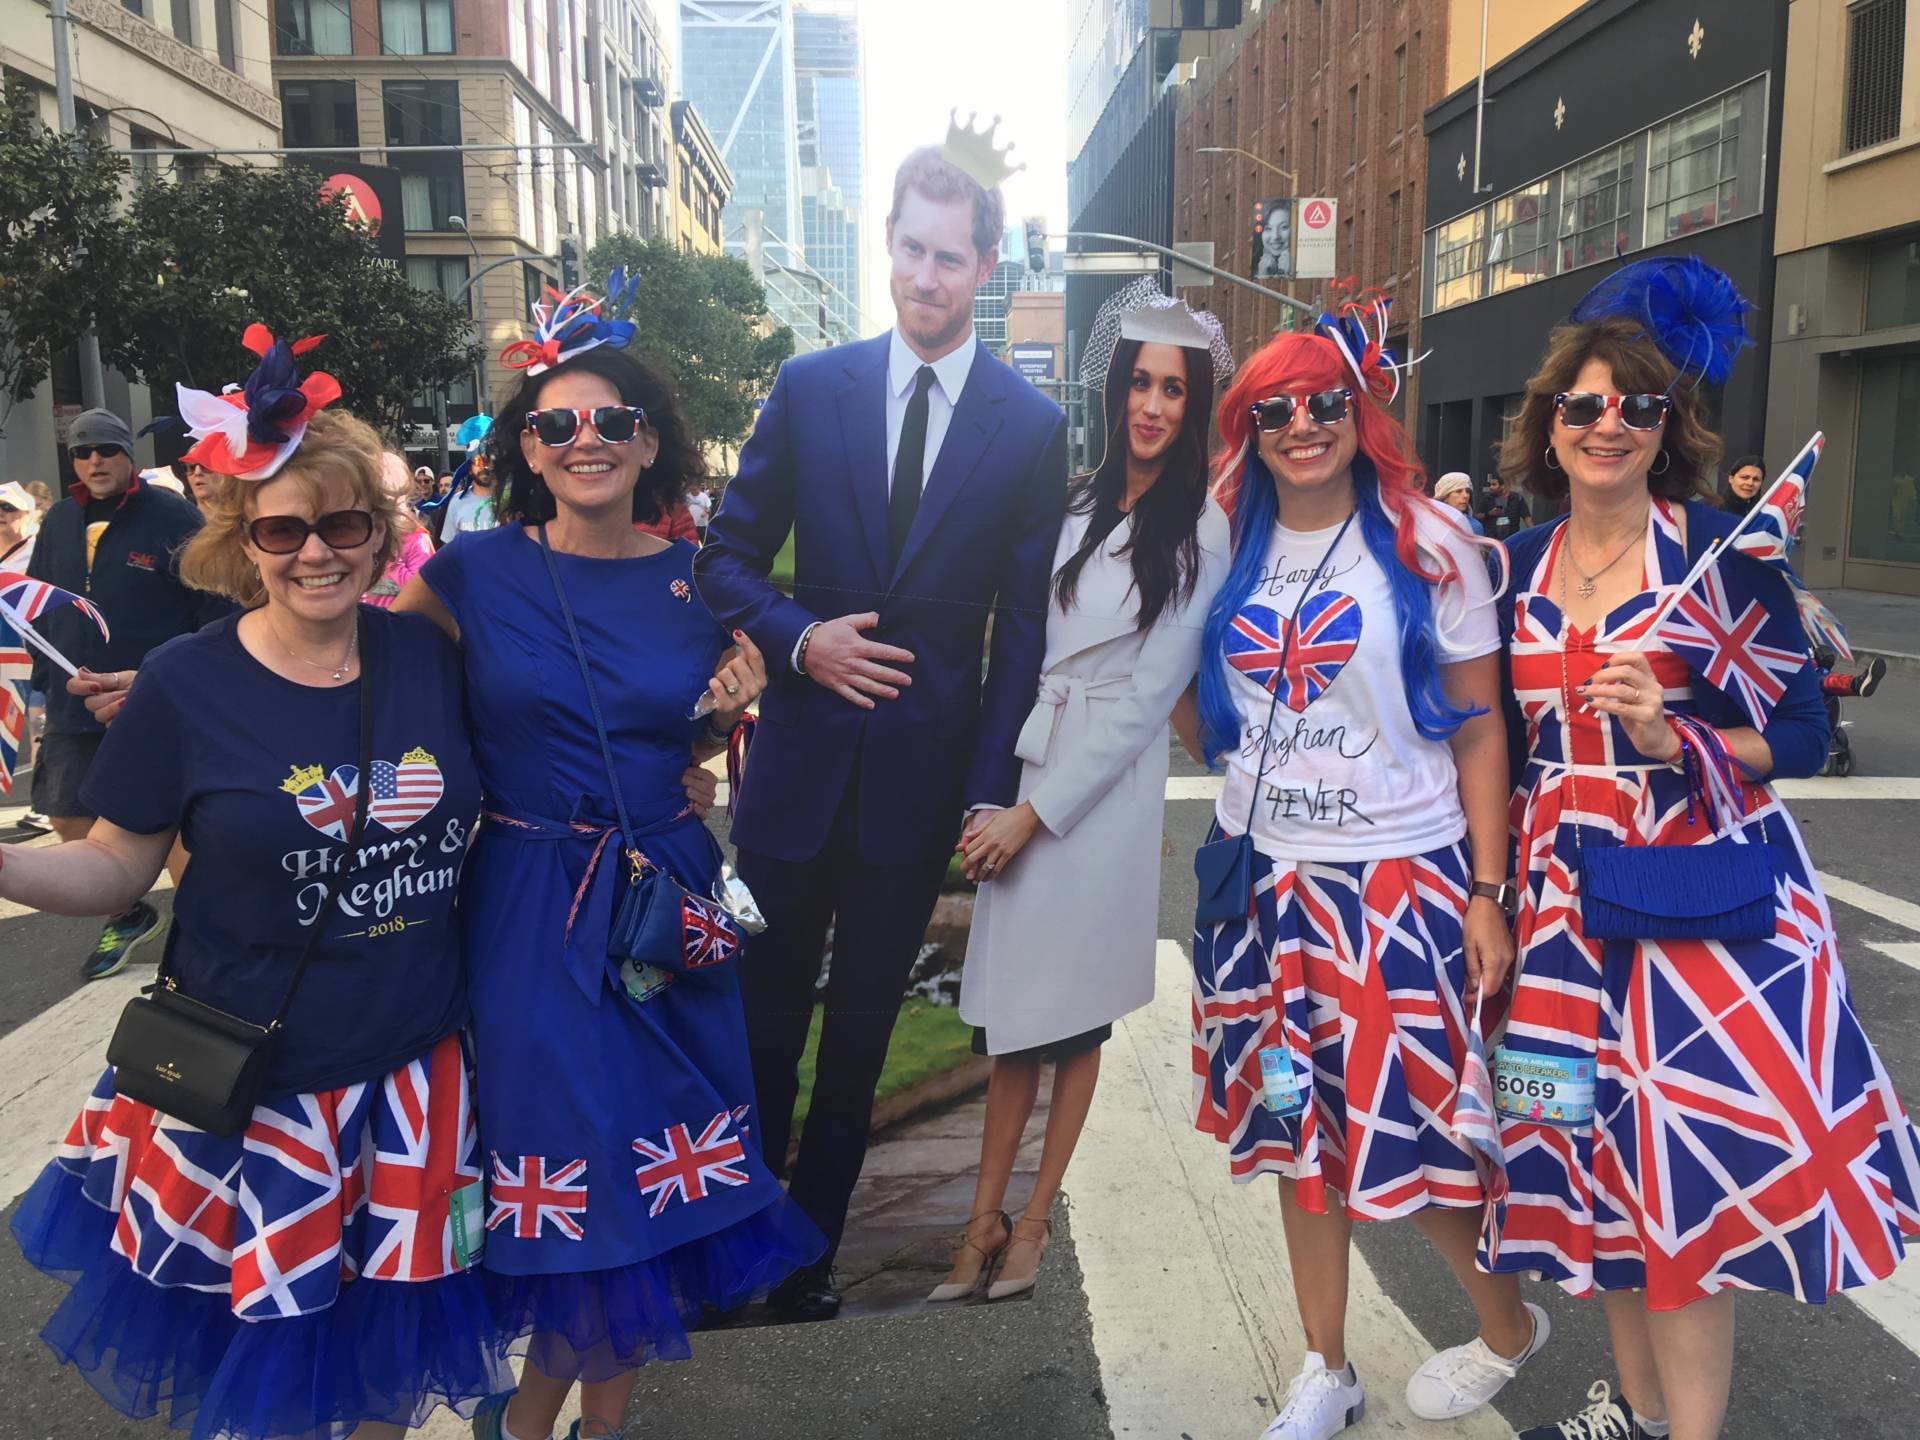 The royal wedding procession makes an appearance at the 107th annual Bay to Breakers in San Francisco. From right to left: Heidi LaBudde, Mollie Beeman, Emily Daley, Bonny Starr. Peter Arcuni/KQED